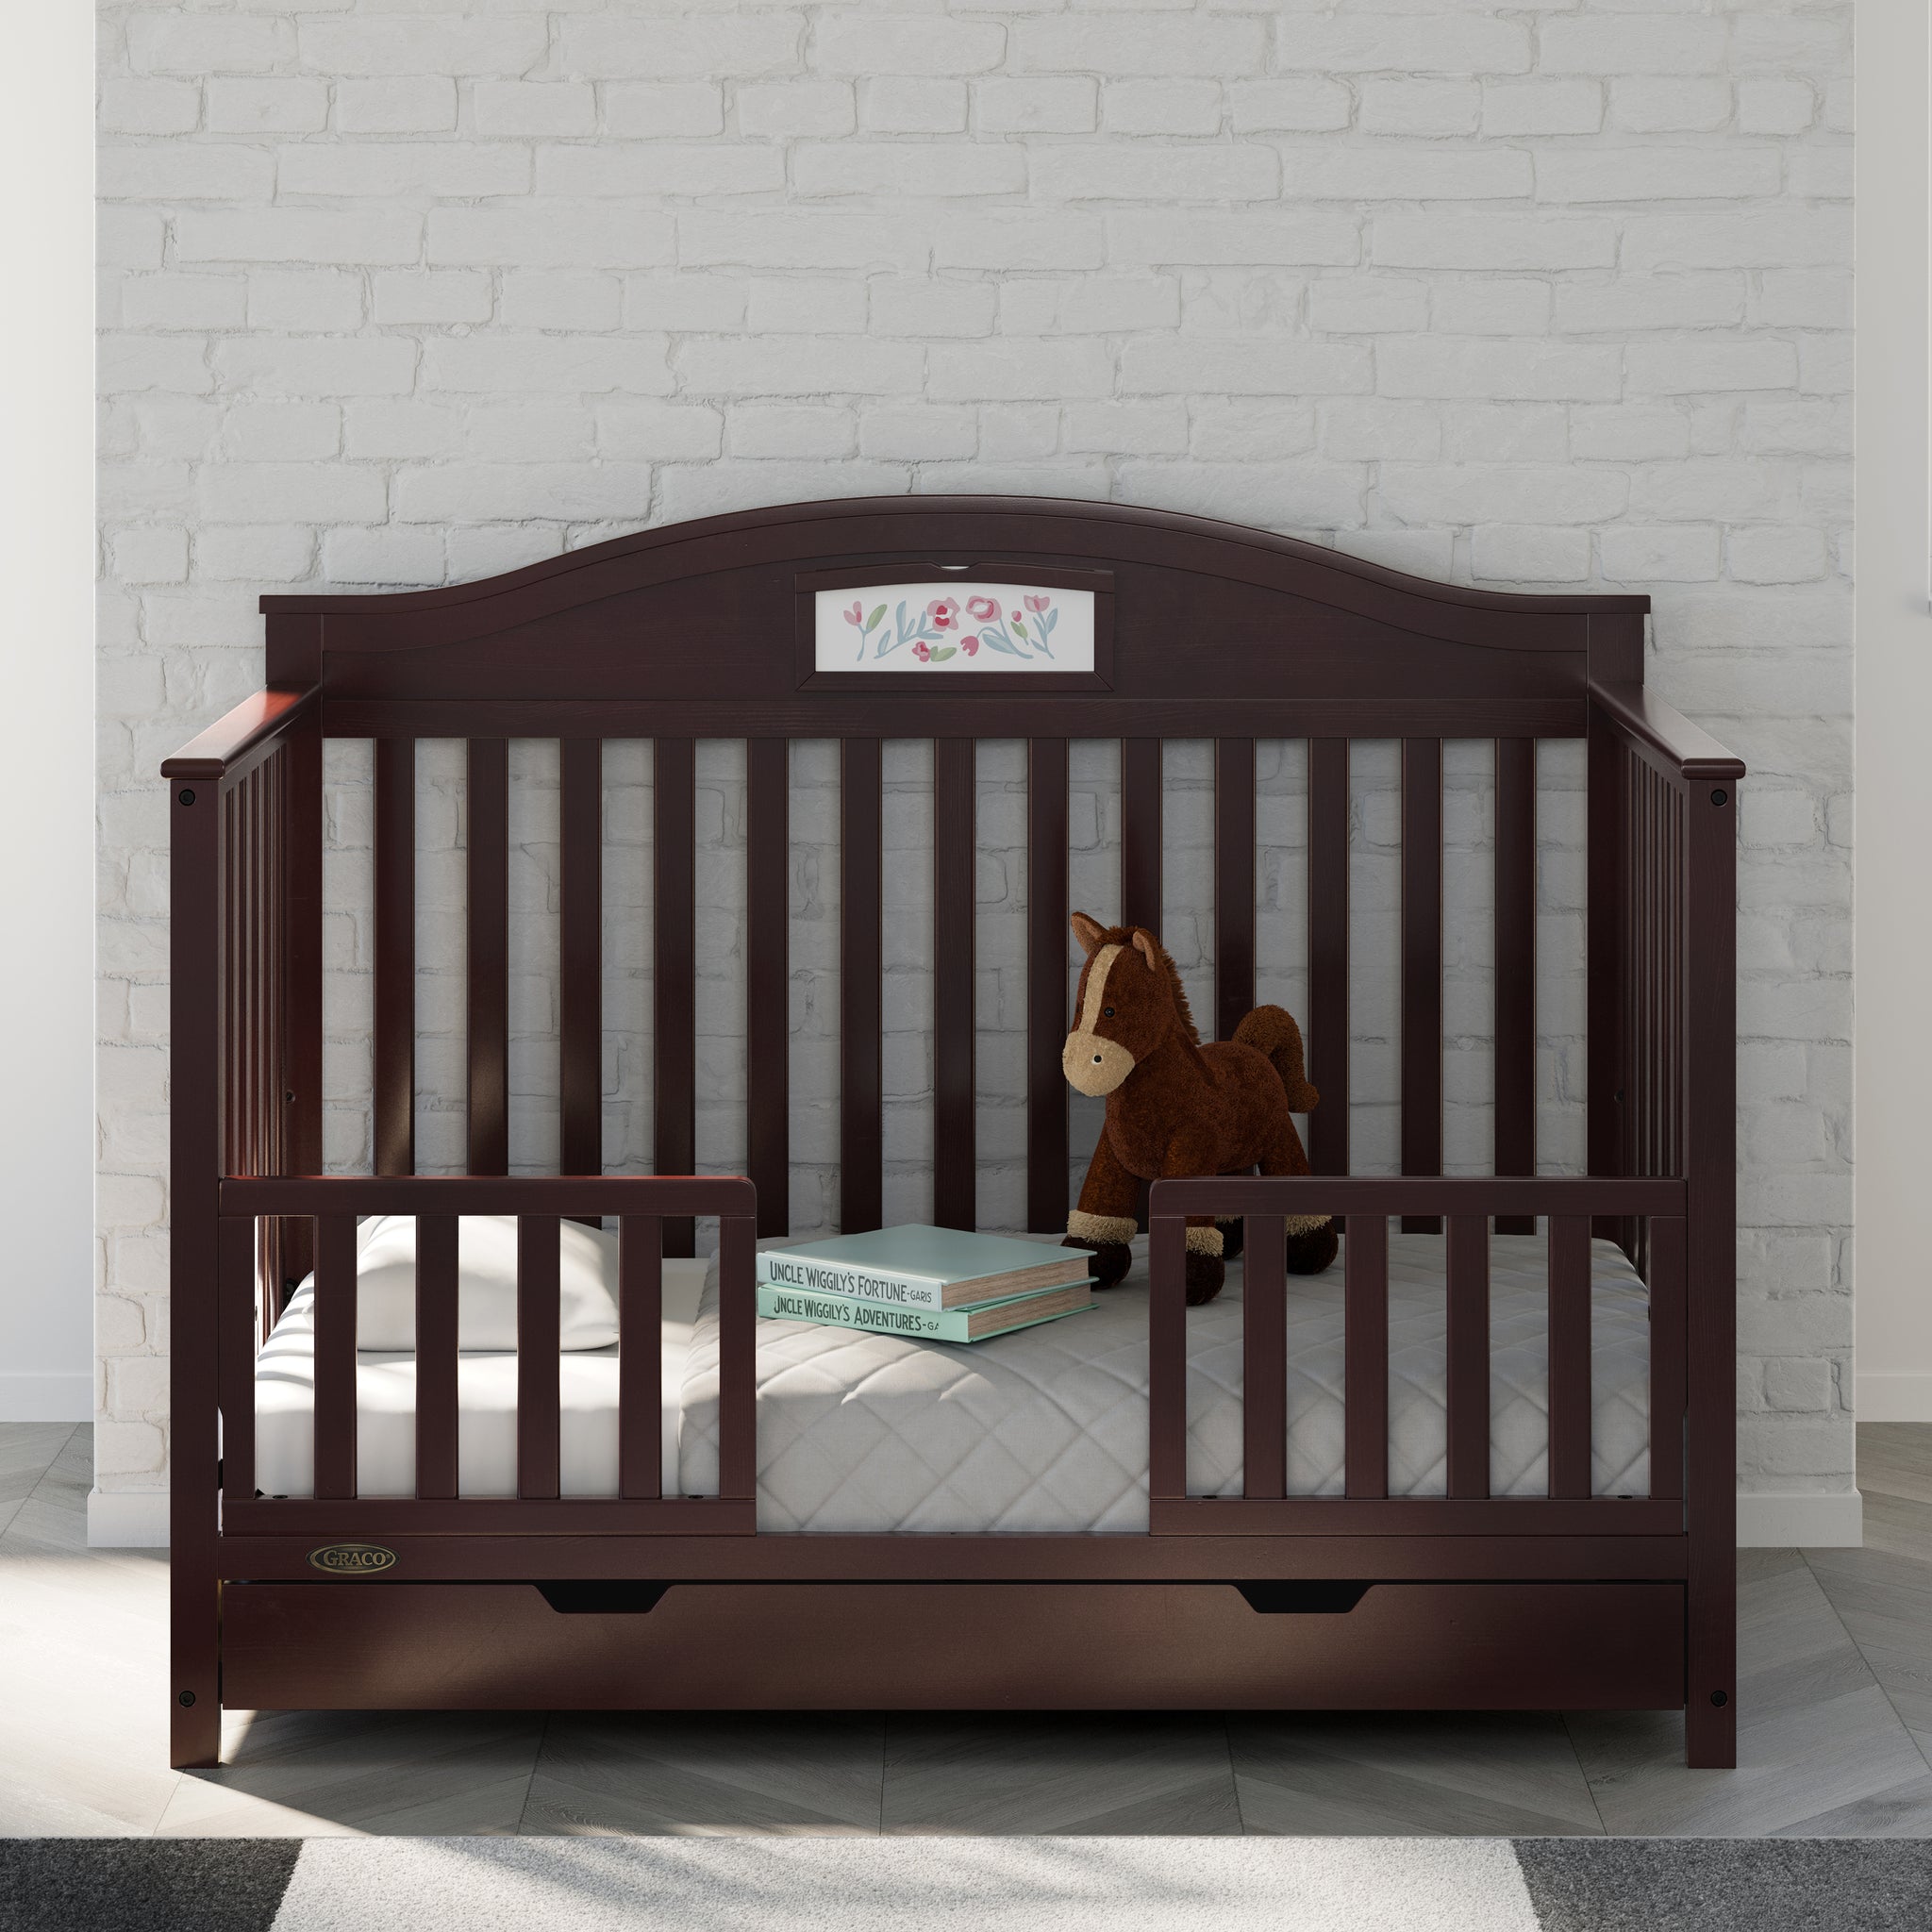 espresso toddler safety guardrail applied in toddler bed, in nursery